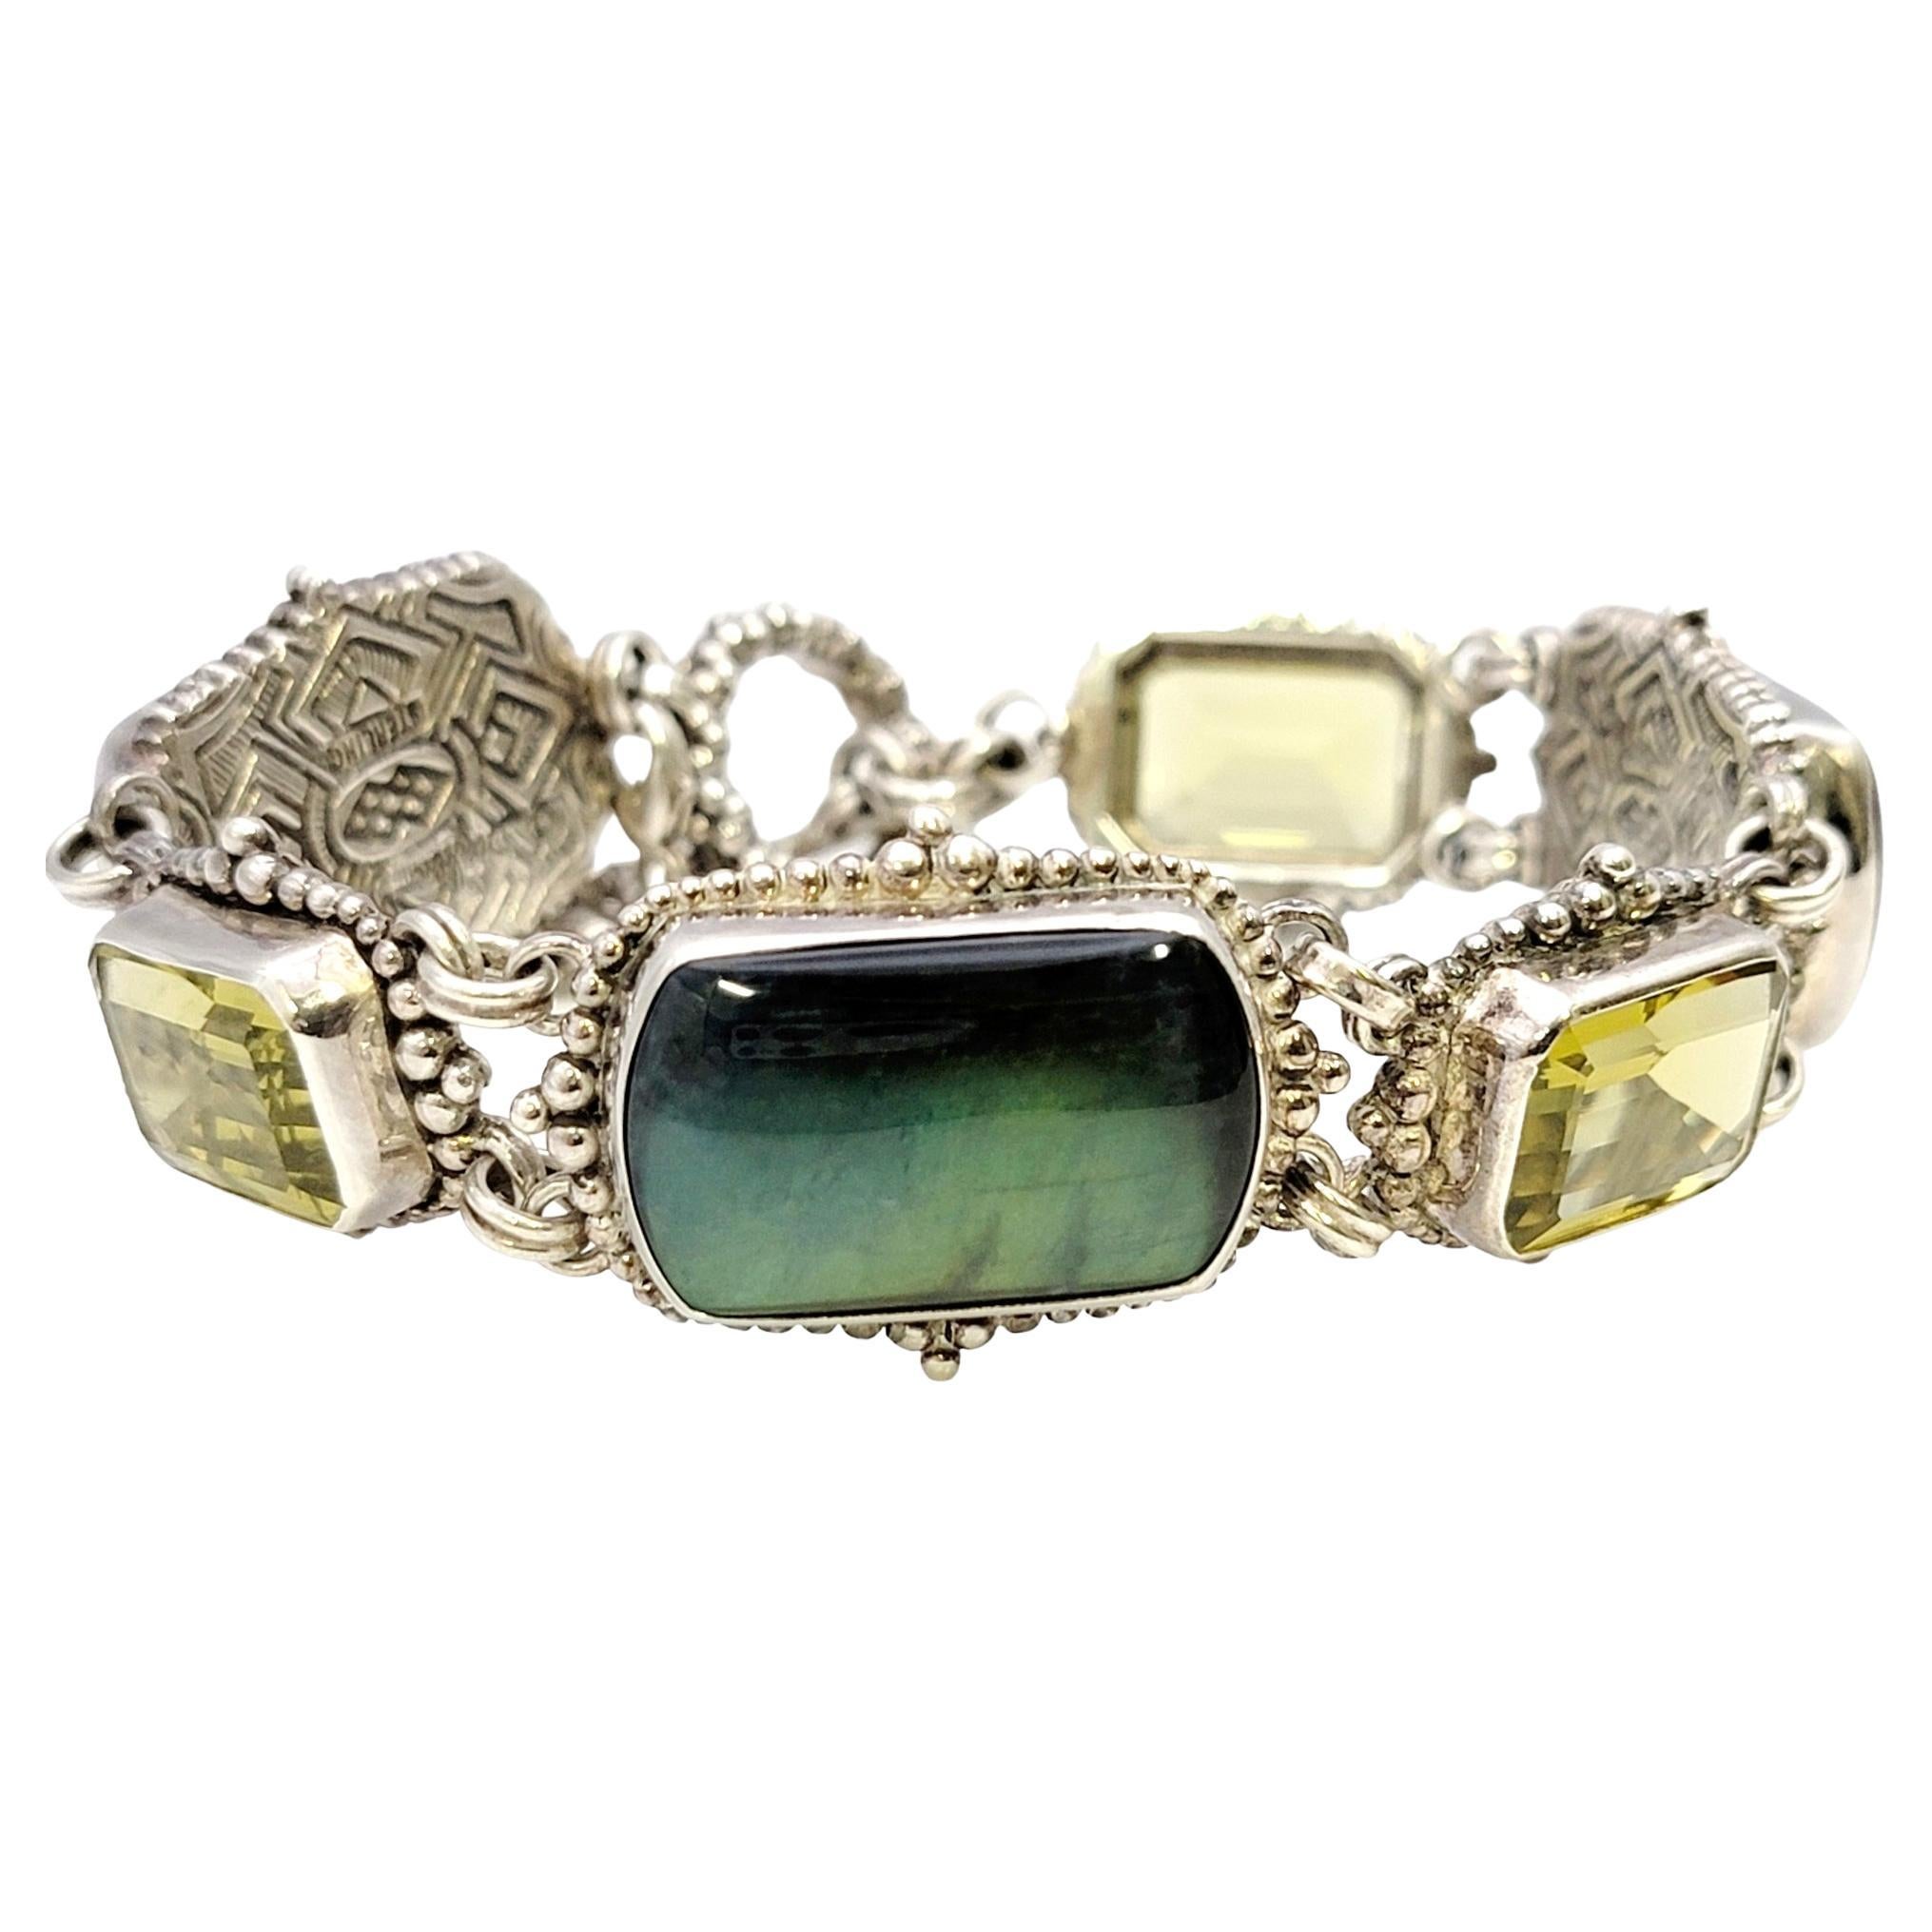 Fabulous statement piece from acclaimed designer, Stephen Dweck. Bold in both color and design this bracelet is sure to get noticed. Established in 1981, in Brooklyn, New York, Stephen Dweck Jewelry began as a sculptural and artistic brand, unlike